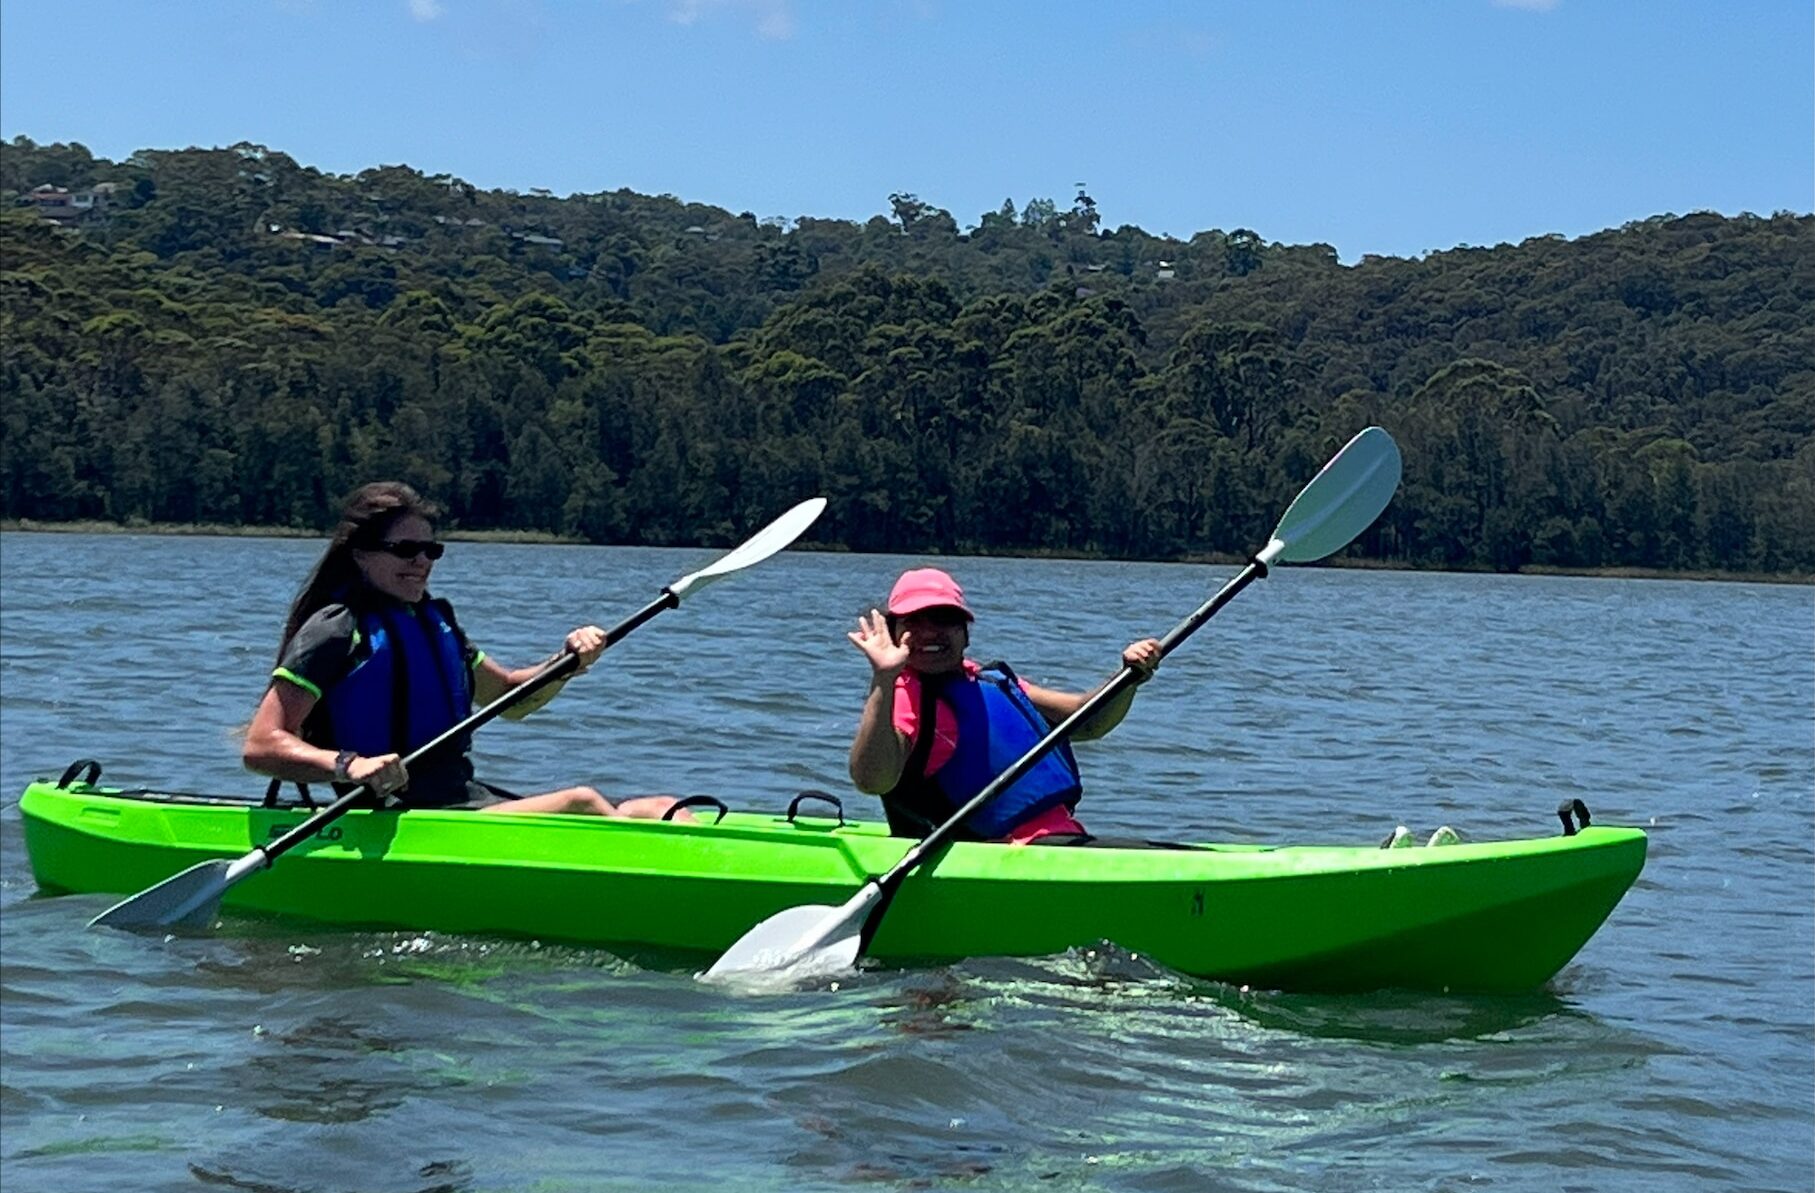 Two females kayaking on a river